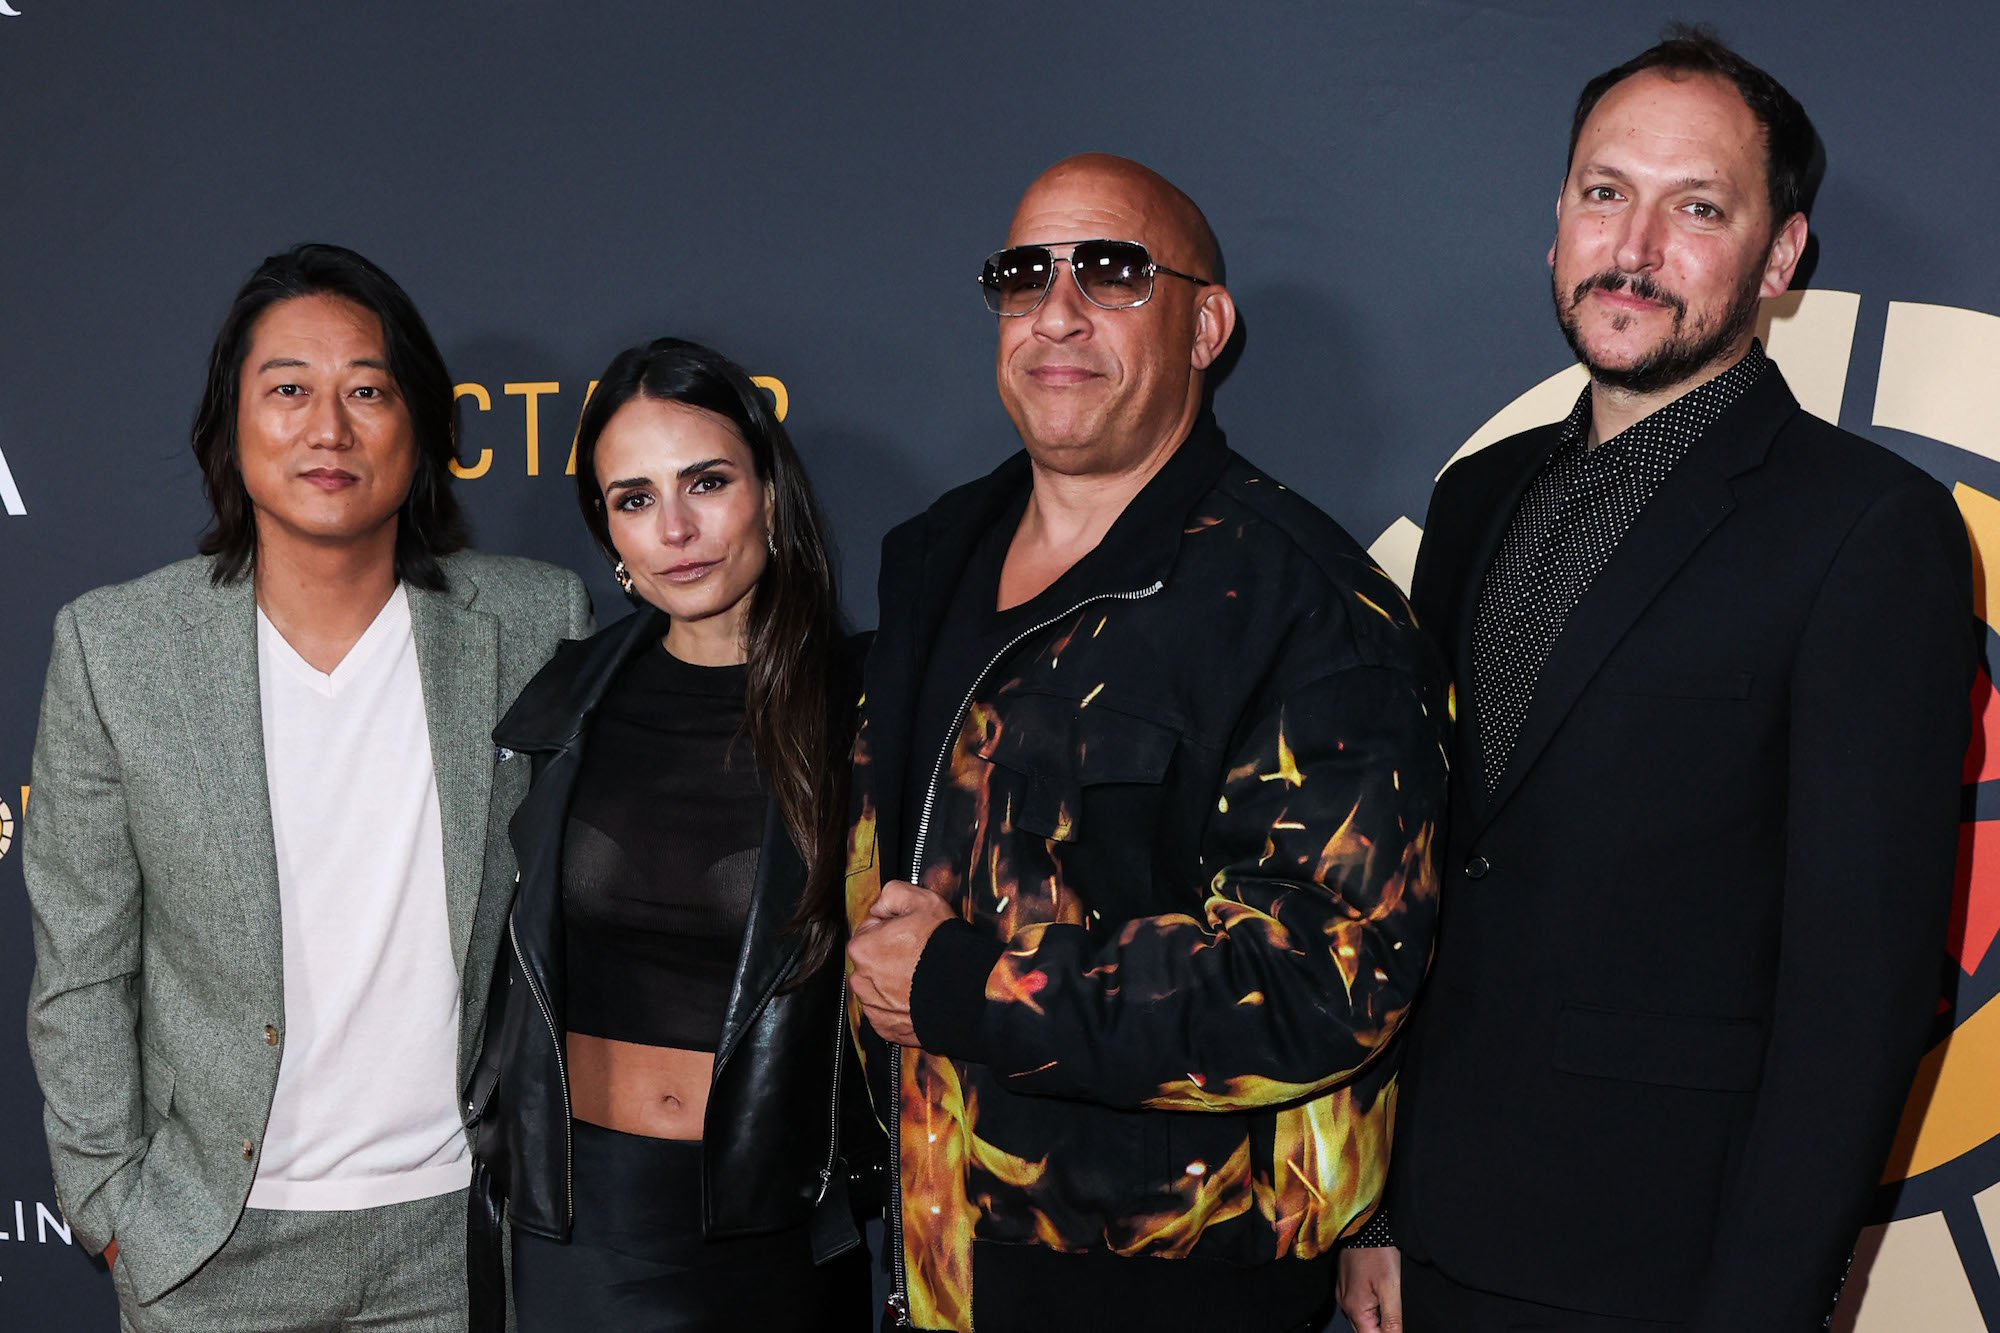 Fast and Furious 9 (F9): Cast, Release Date, New Trailer, Spoilers